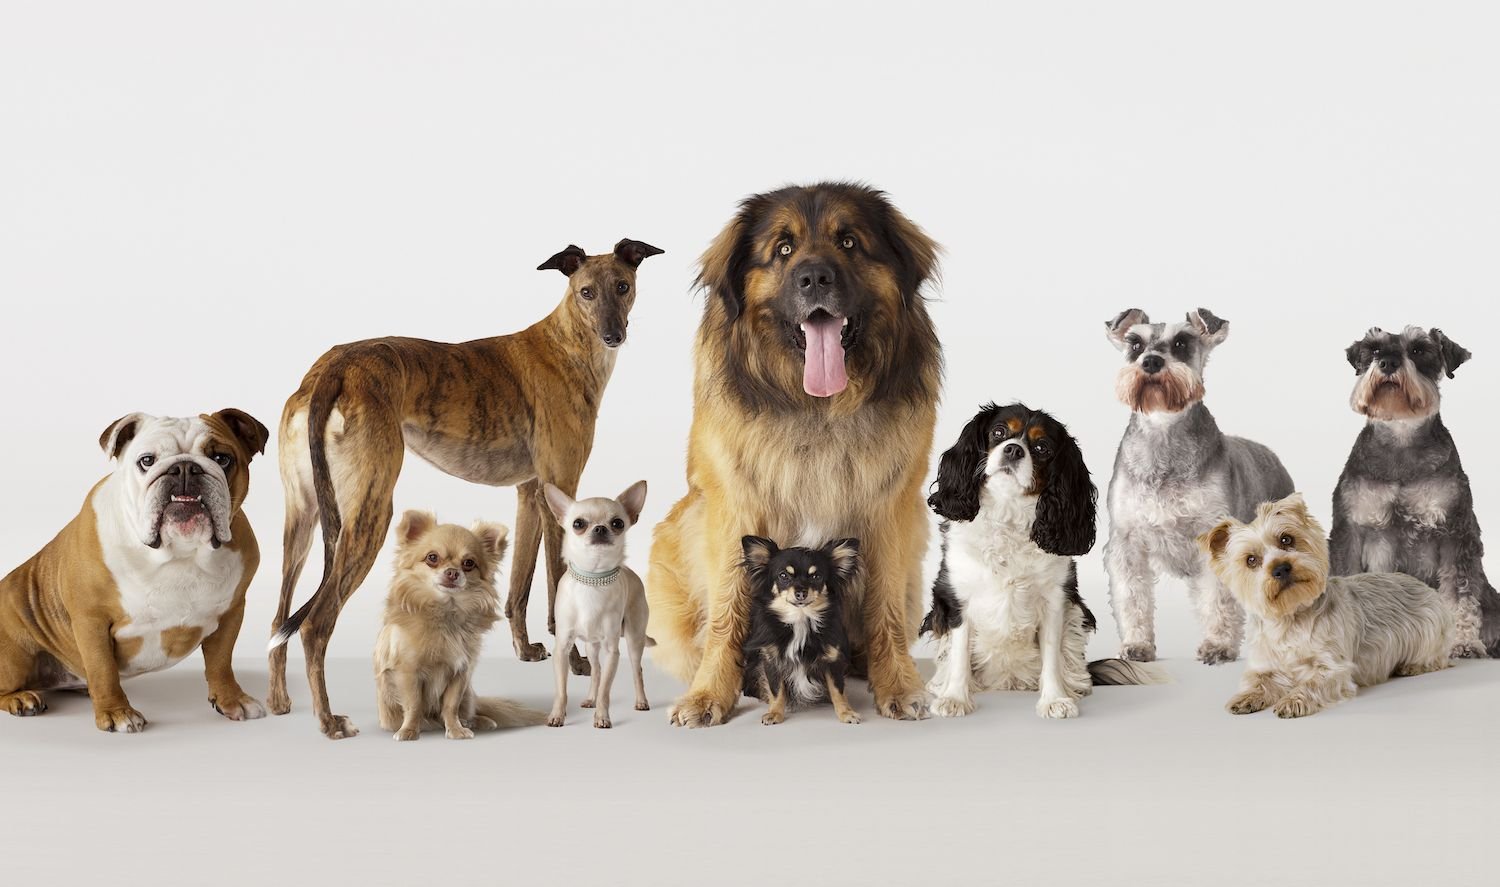 200+ Dog Breeds Feature All Types of Dogs